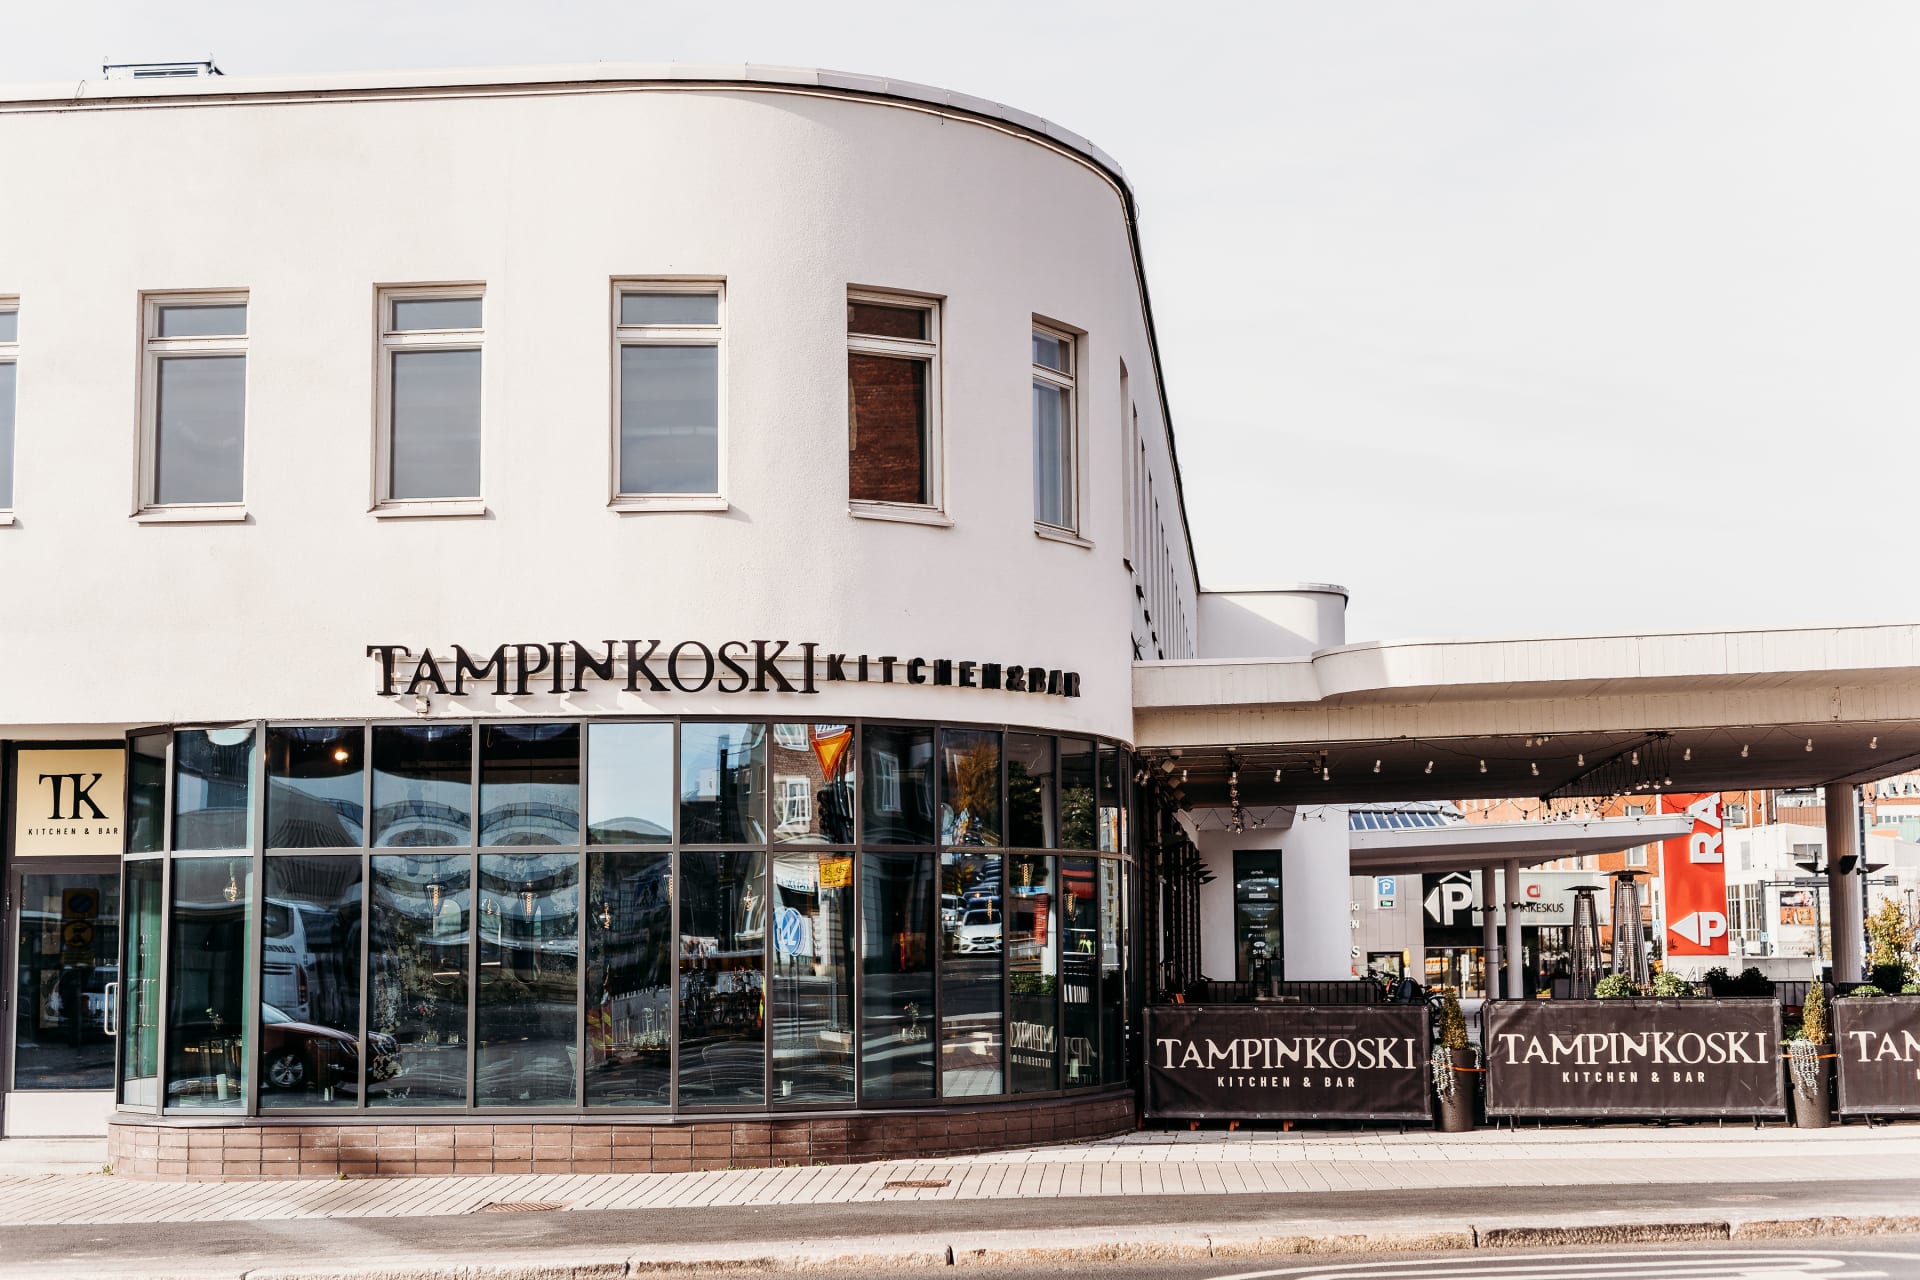 You can find us in the center of Tampere at Vuolteenkatu 1, Ratina corner.